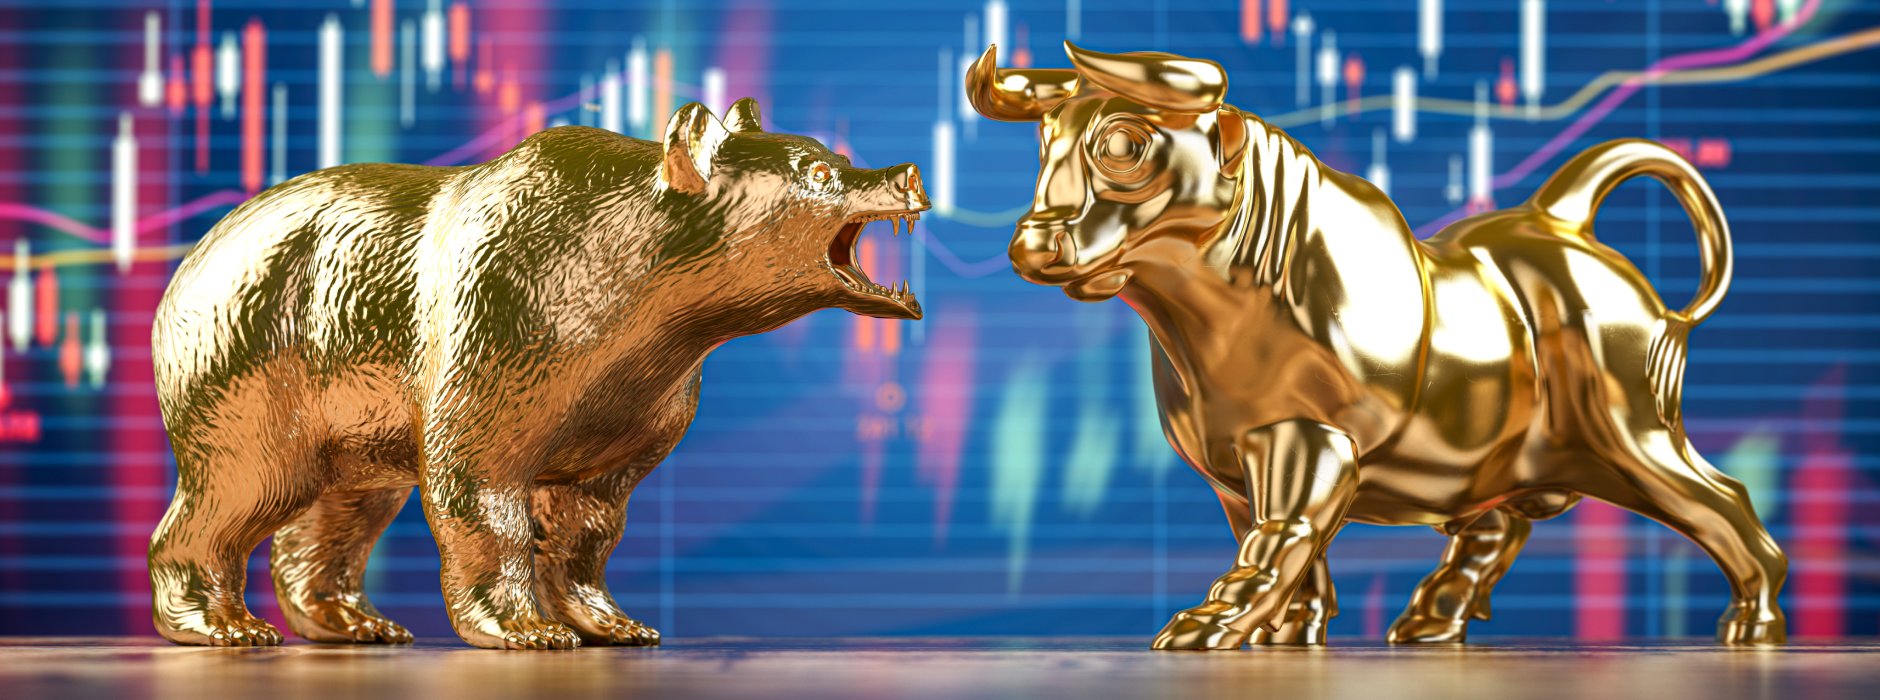 golden statues of a bear and a bull in front of a screen showing a trading chart